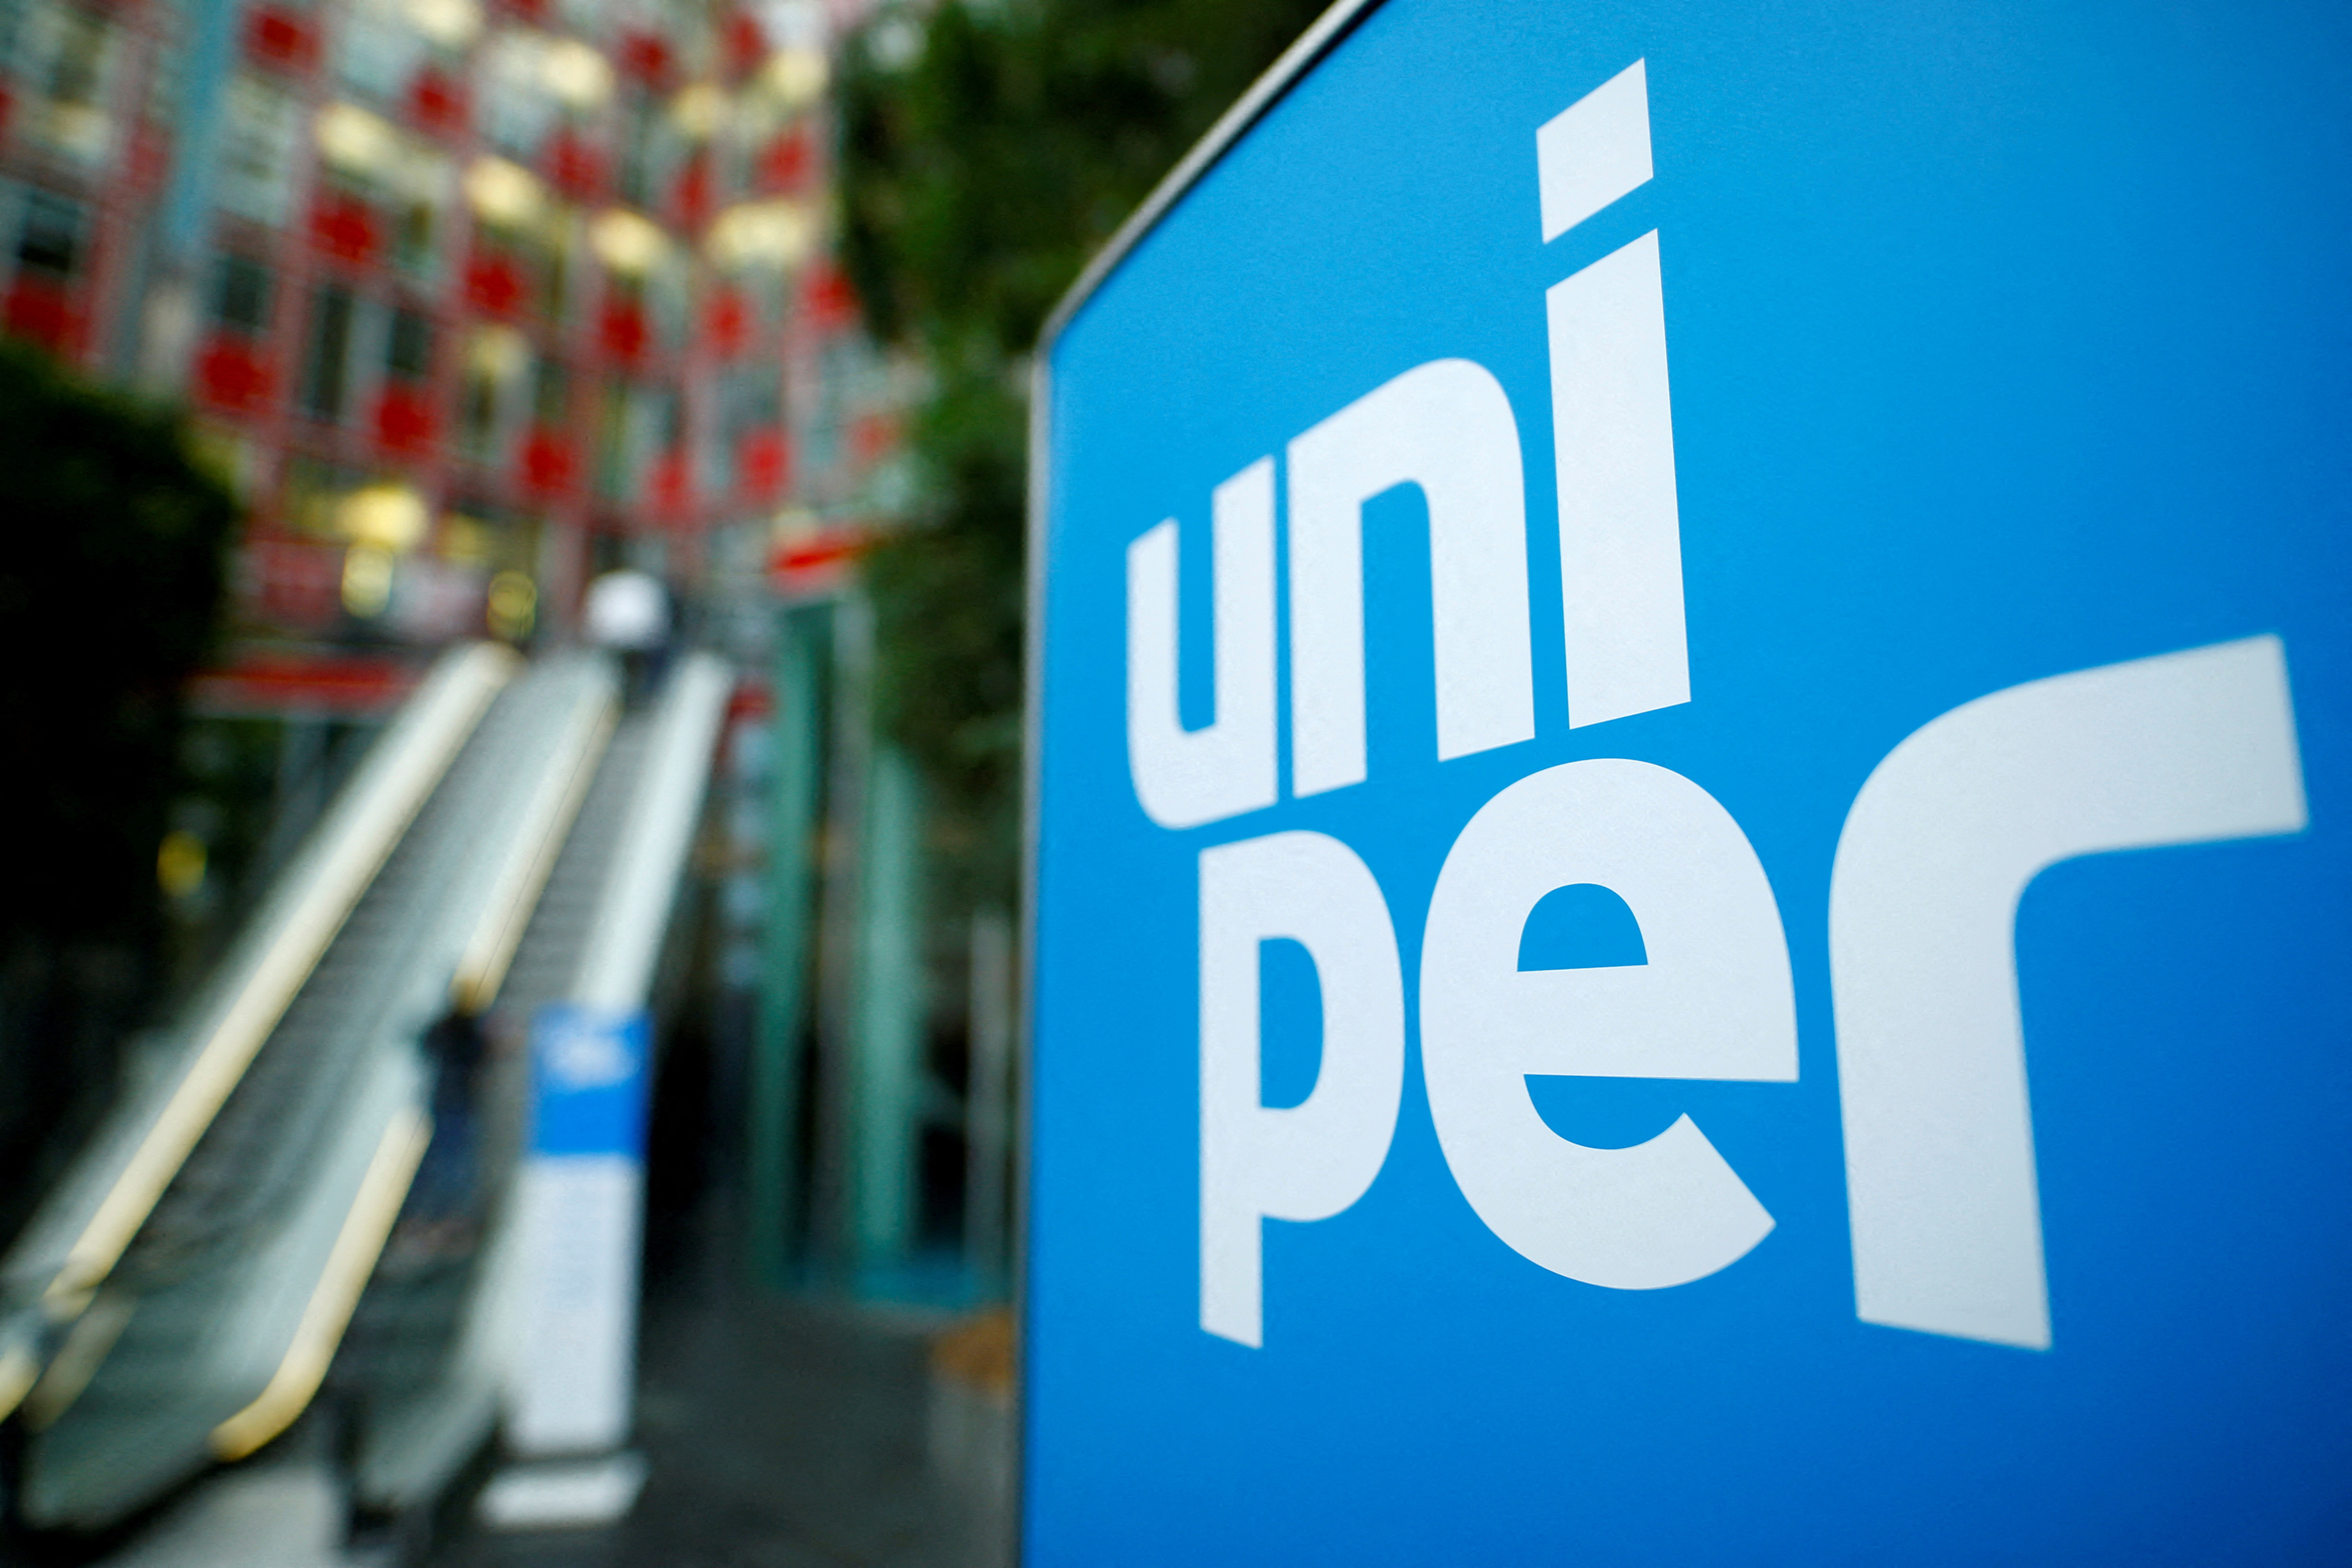 The logo of German energy utility company Uniper SE is pictured in the company's headquarters in Duesseldorf